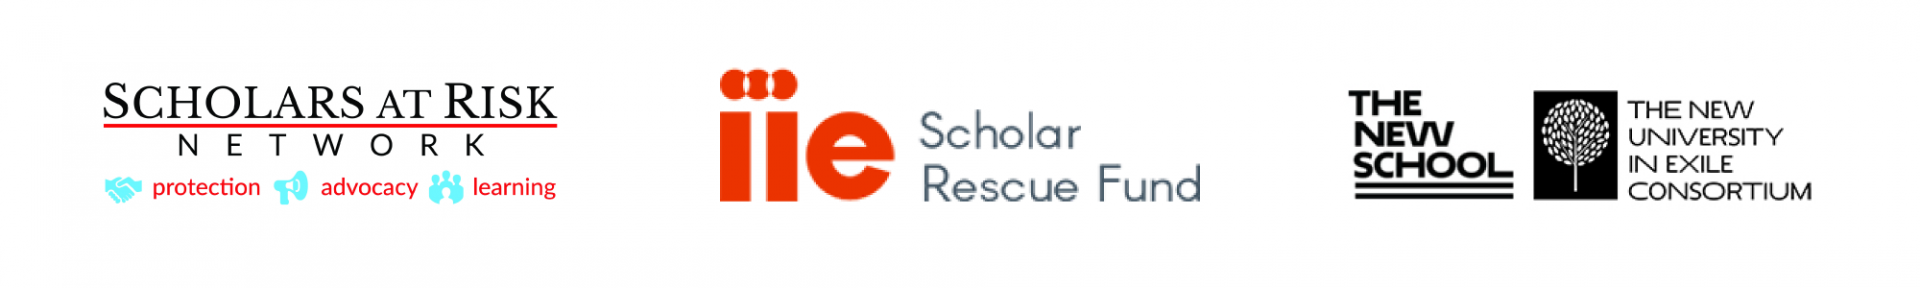 Scholars at Risk, Scholar Rescue Fund, and New University in Exile Consortium